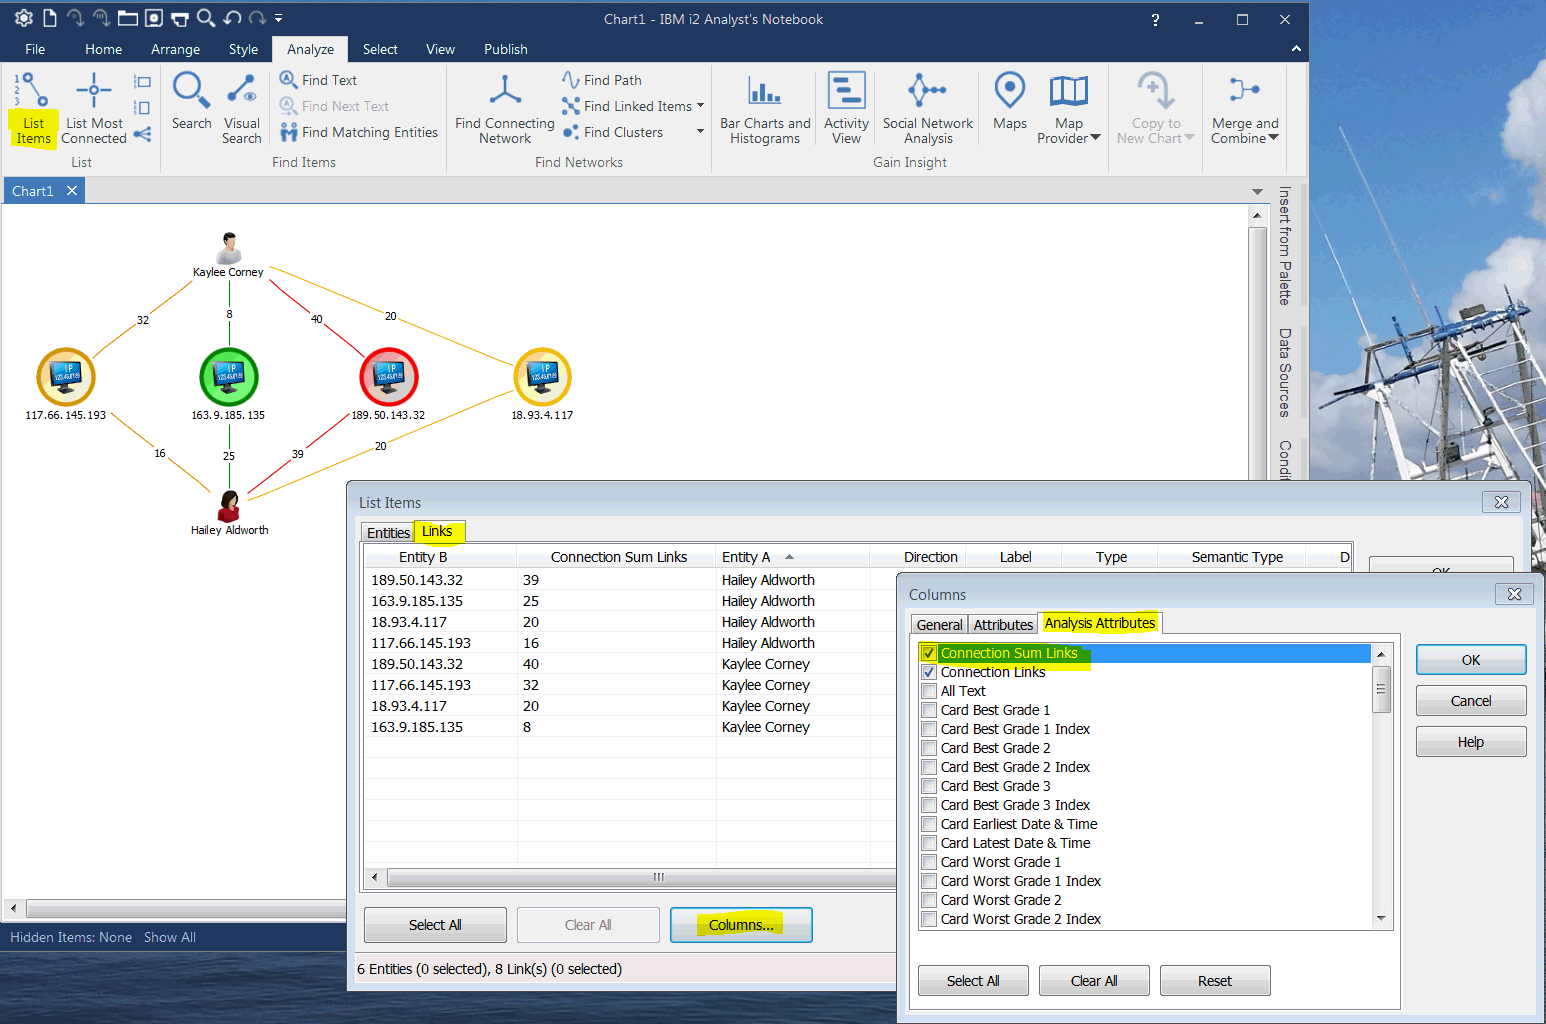 Analyzing the total number of links between entities in IBM i2 Analyst's  Notebook